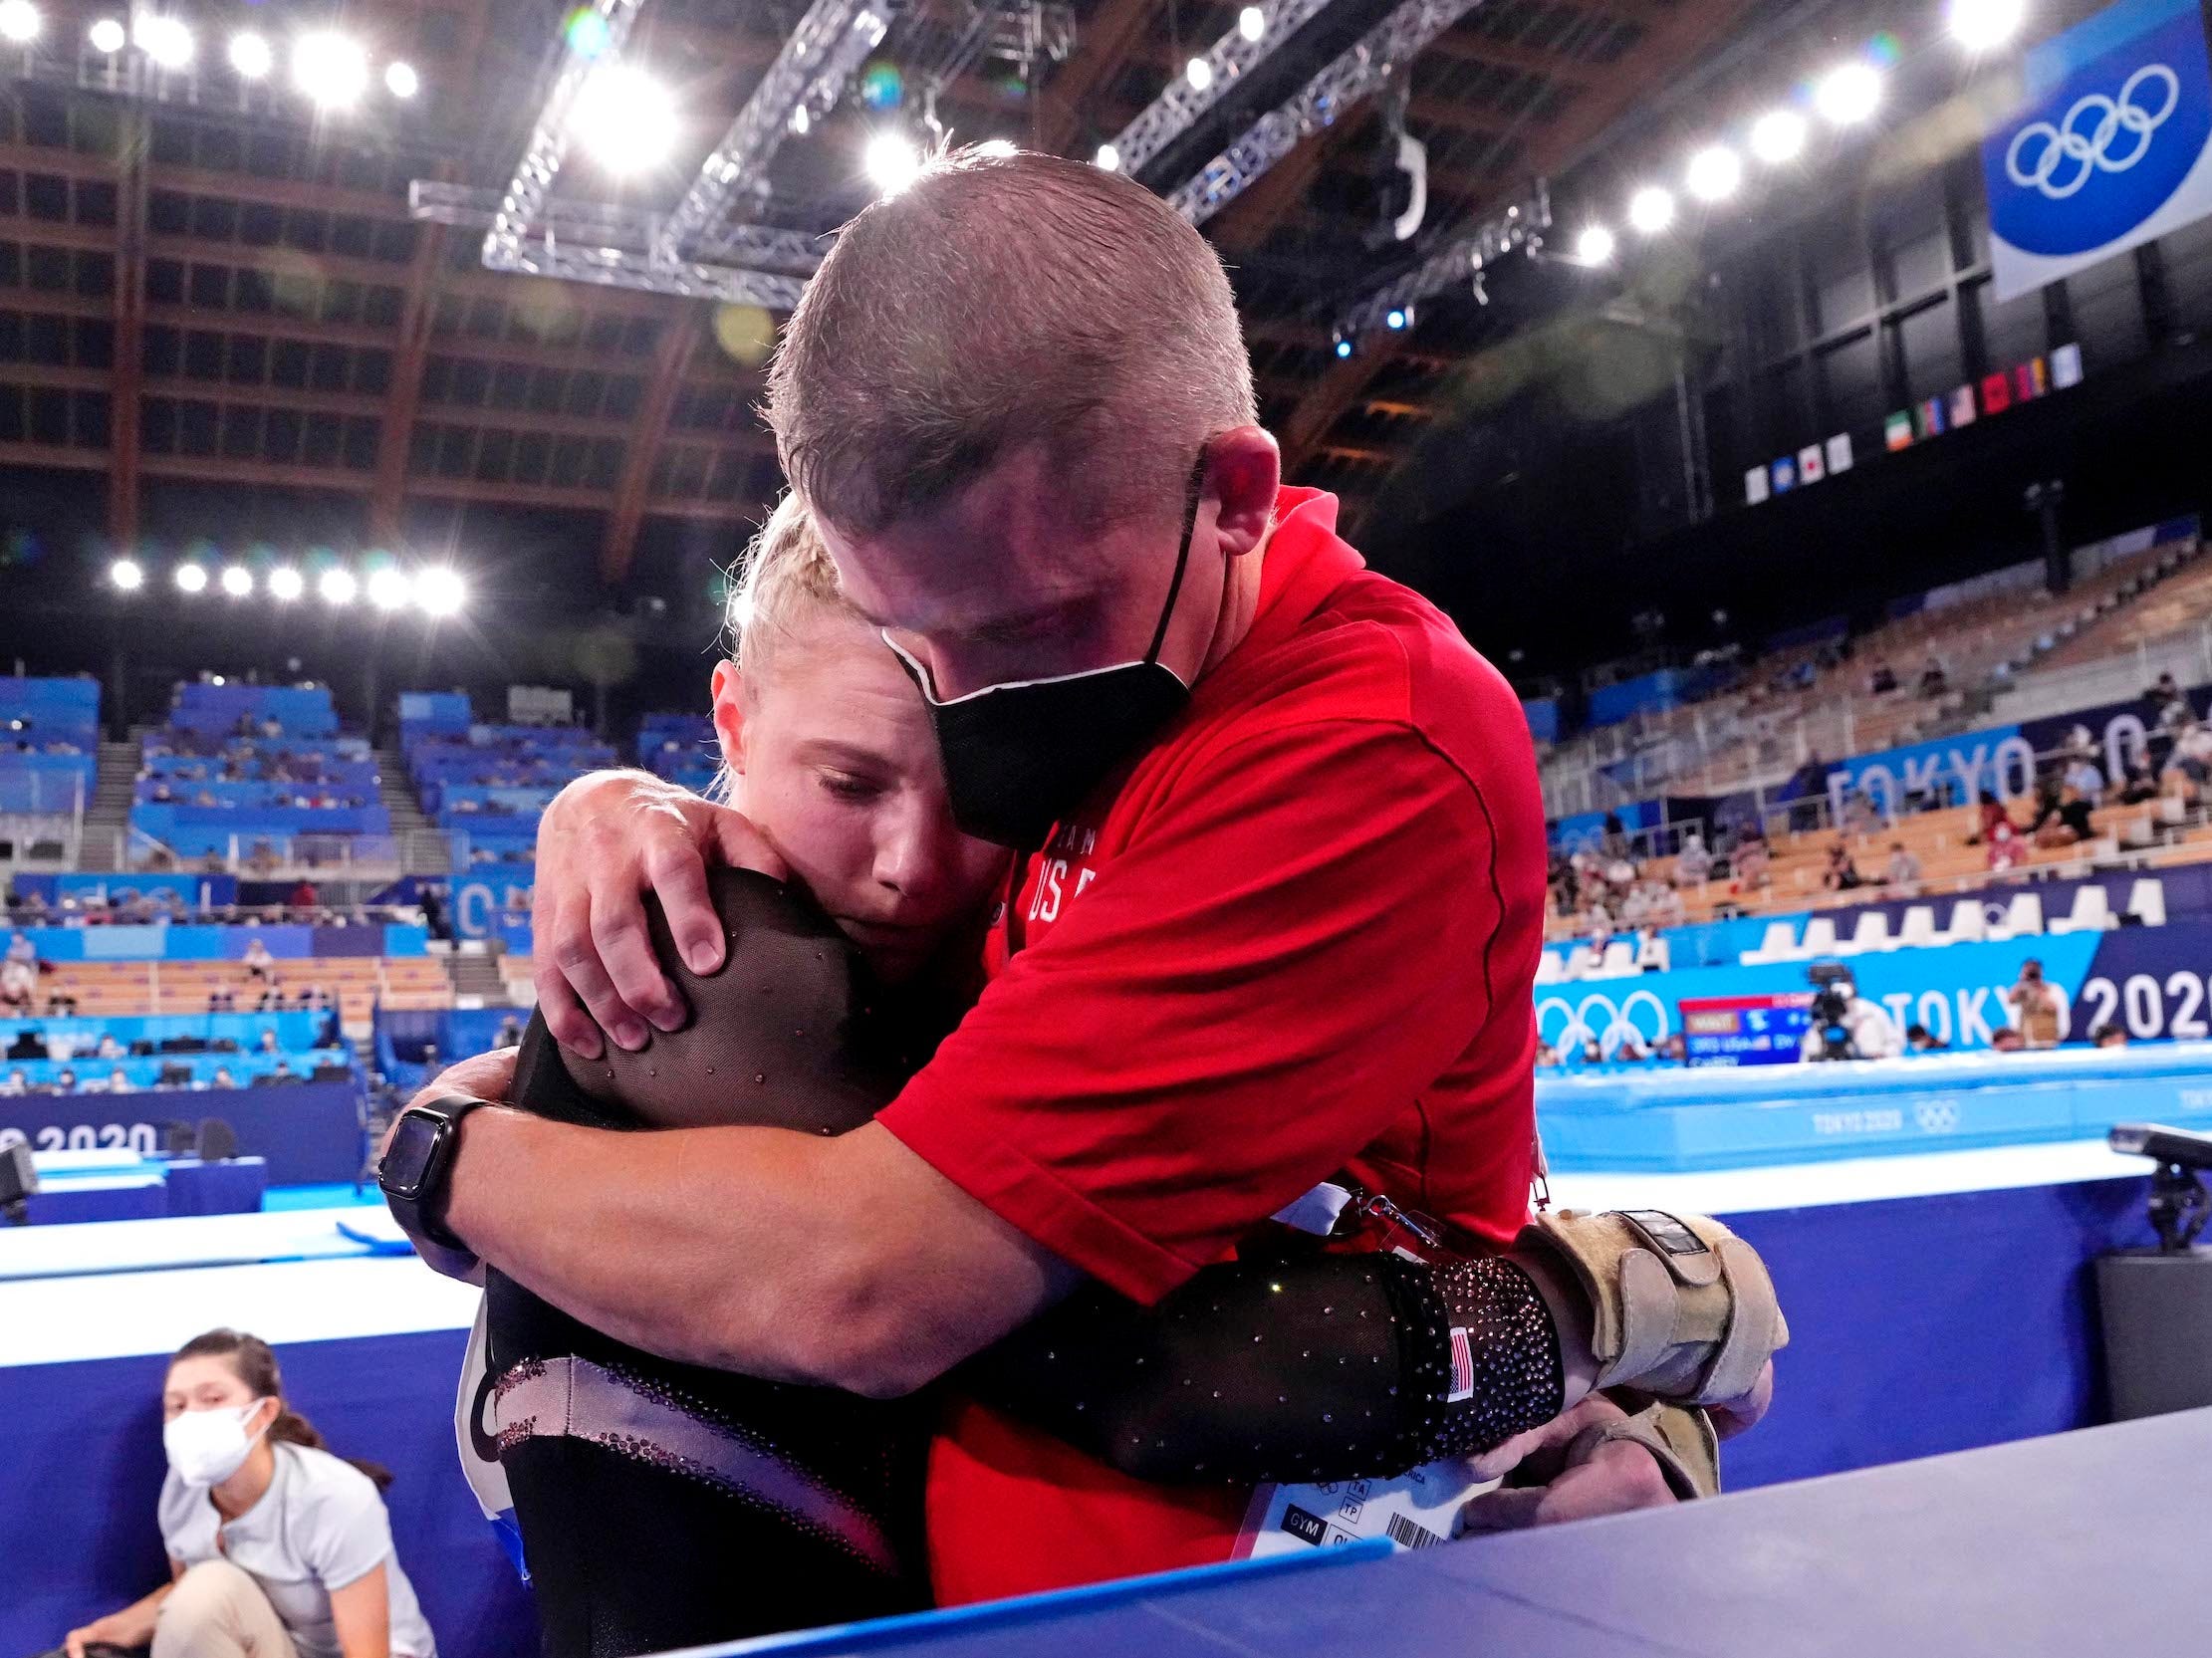 Brian Carey (right) - Jade Carey's father and coach - comforts his daughter after her vault mishap.